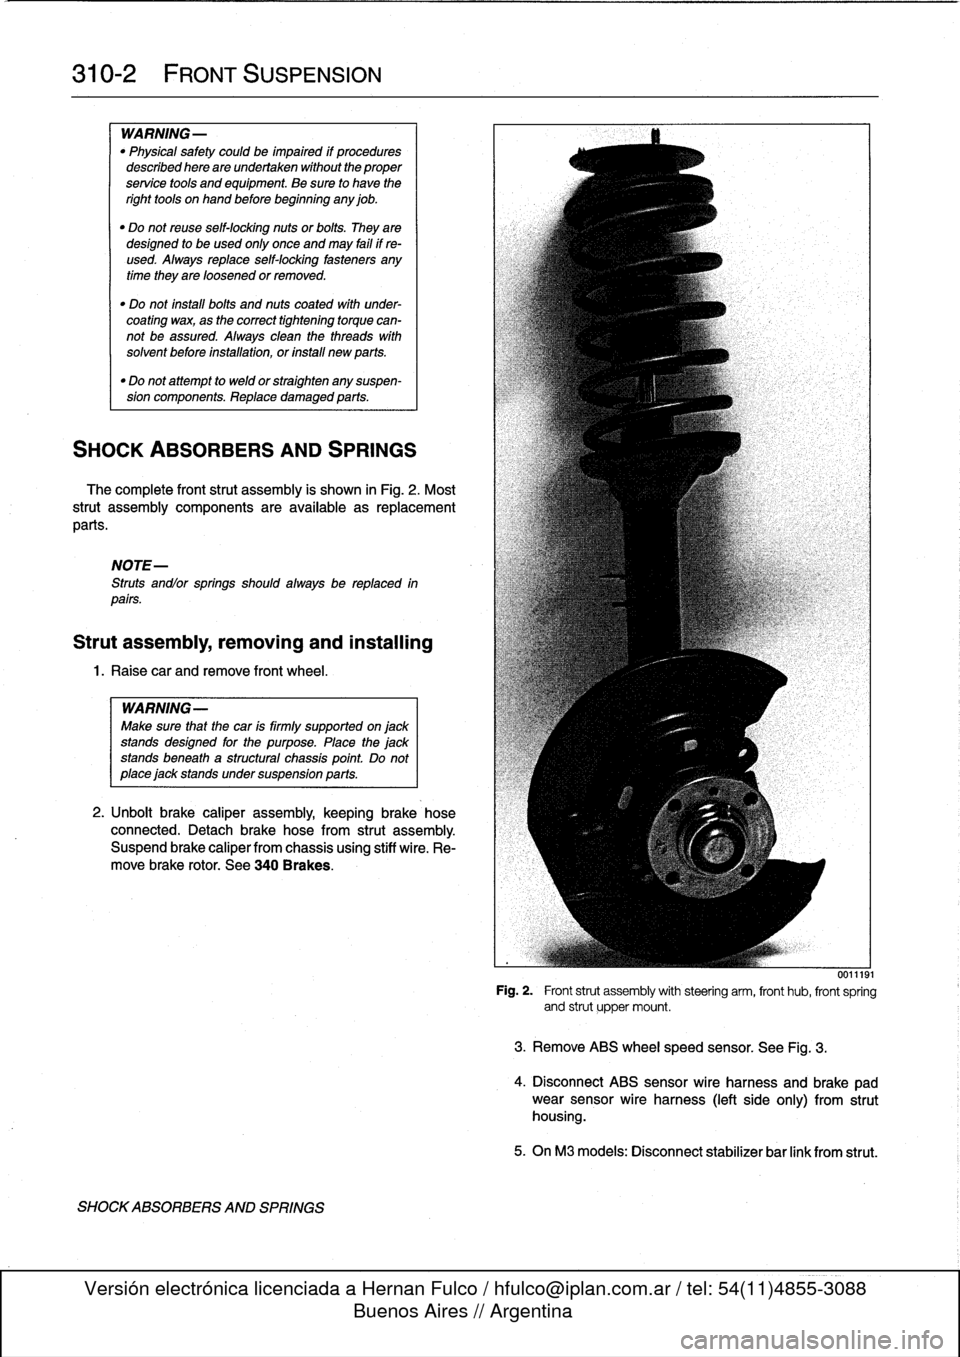 BMW M3 1998 E36 Workshop Manual 
310-2

	

FRONT
SUSPENSION

WARNING-

"
Physical
safety
could
be
impaired
if
procedures
described
here
areundertaken
without
the
proper
service
tools
and
equipment
.
Be
sure
to
have
the
right
tools
o